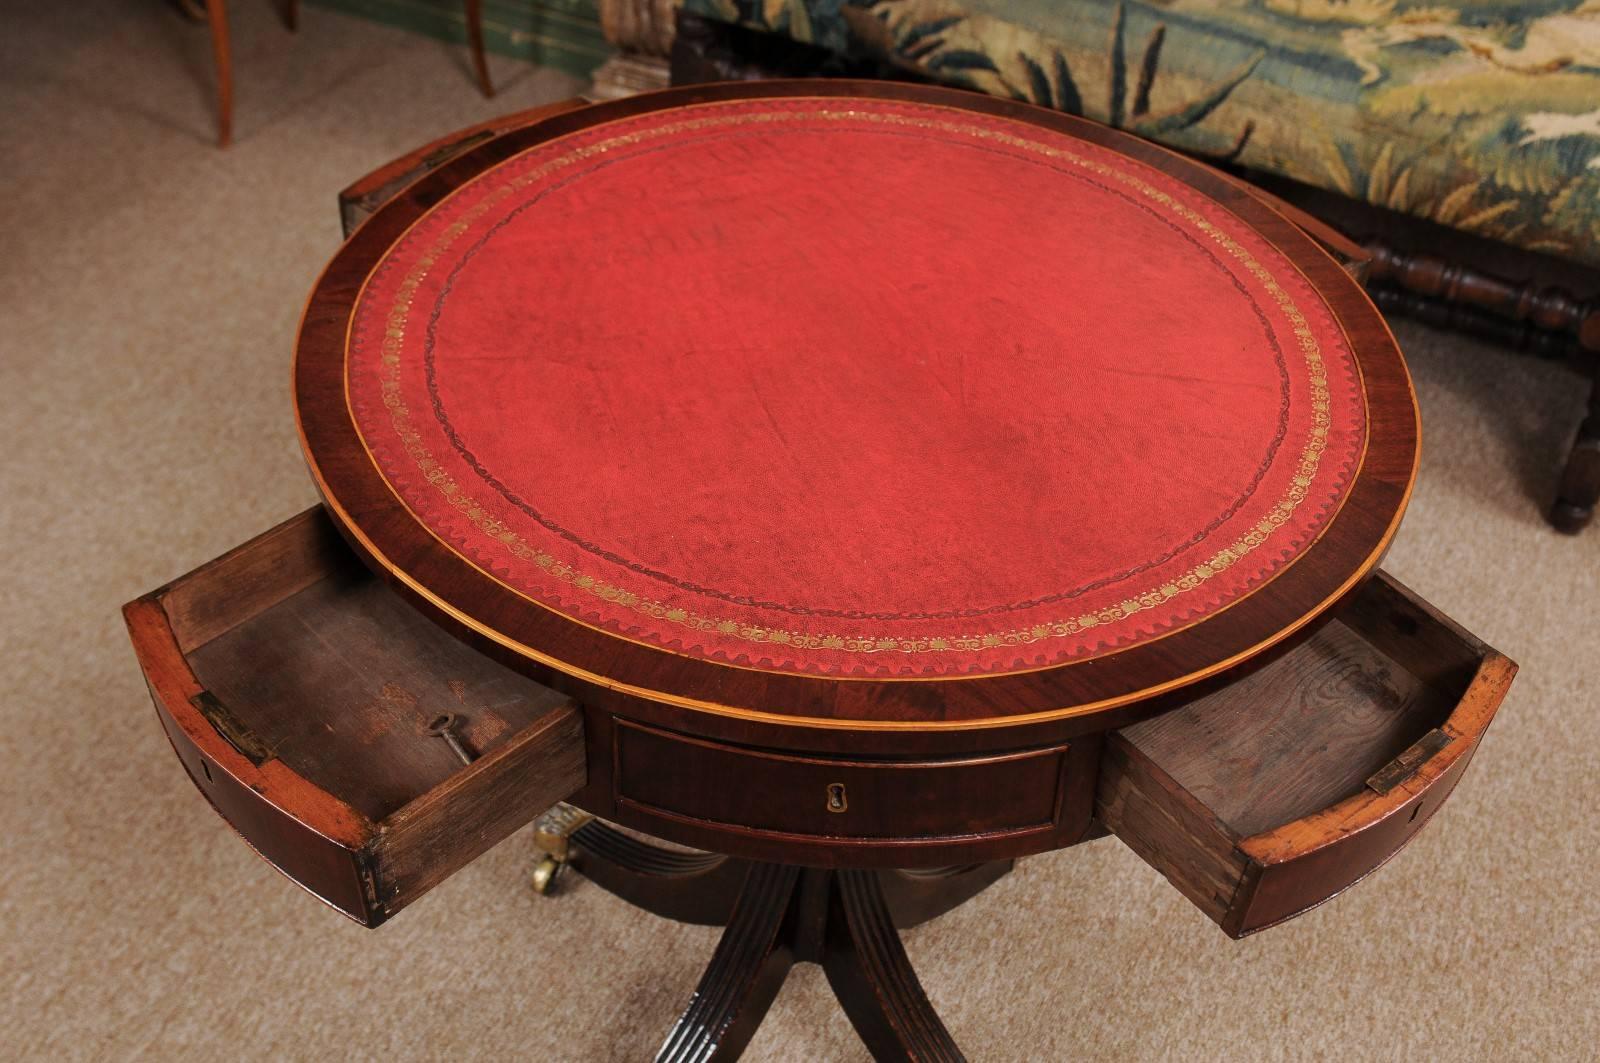 Early 19th Century English Regency Revolving Drum Table with Red Leather Top 1